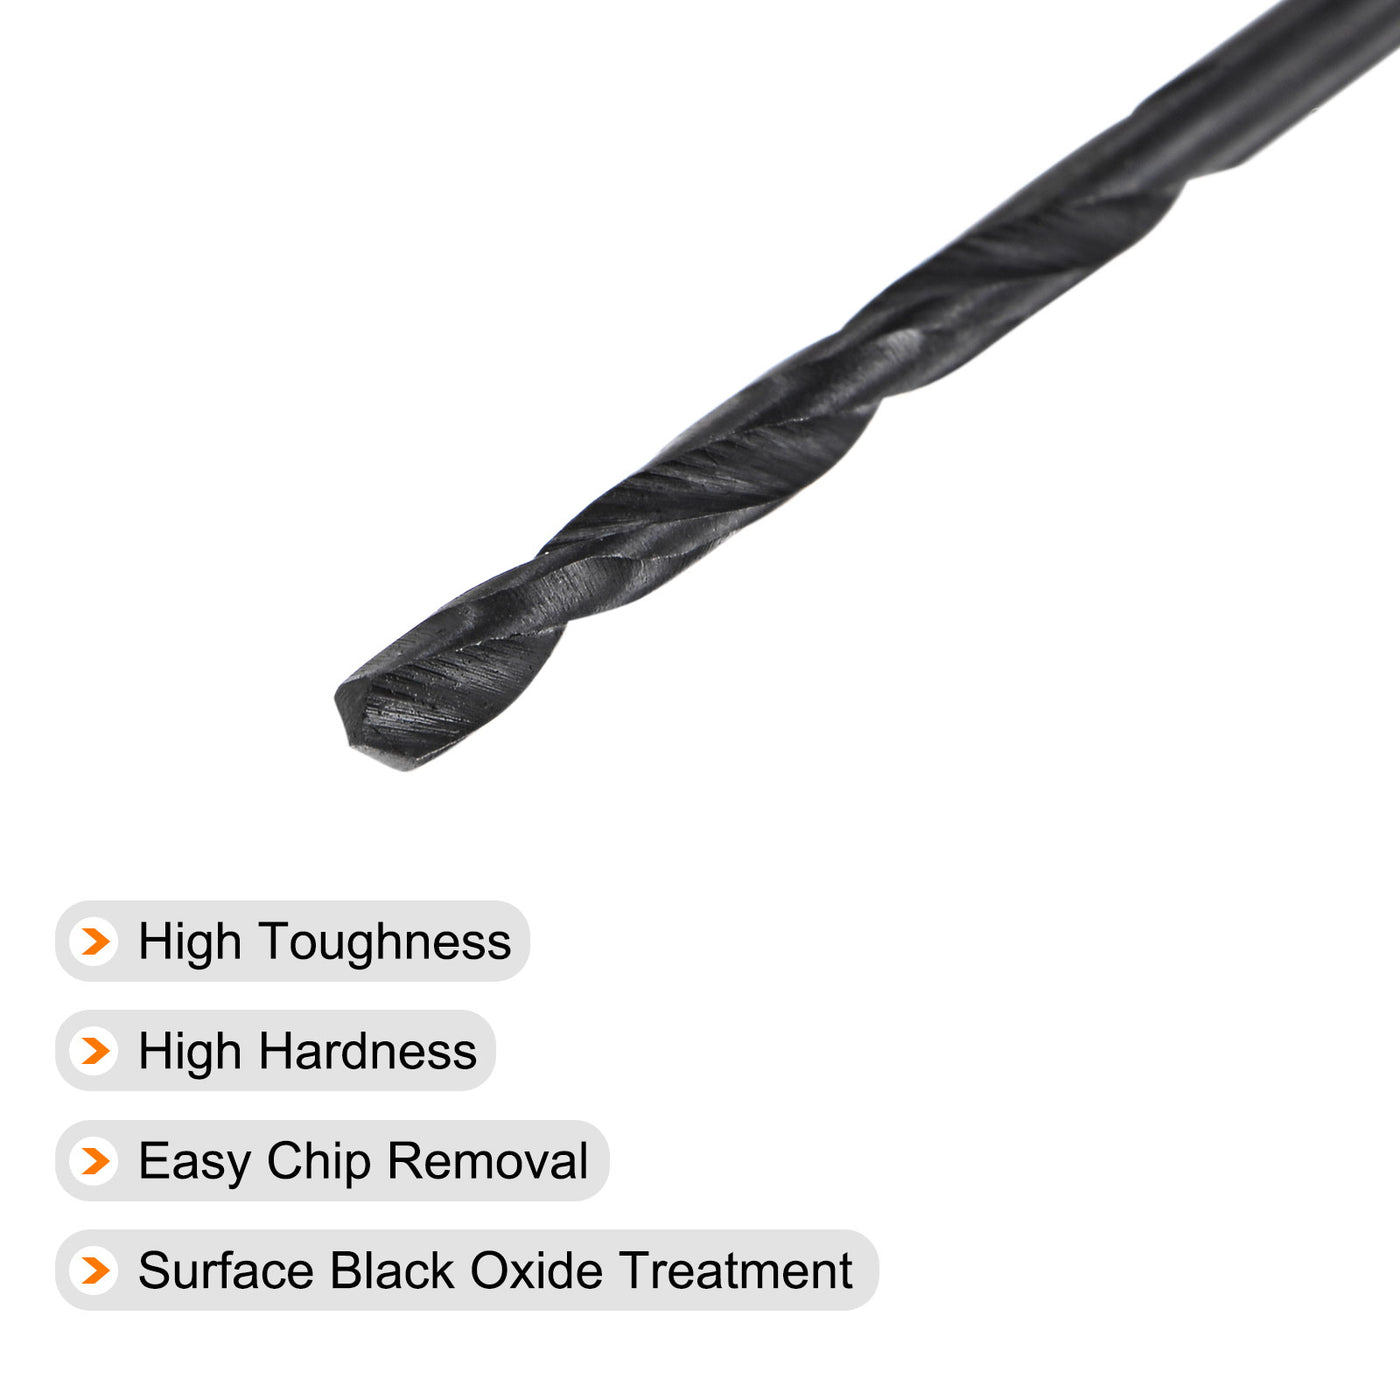 uxcell Uxcell High Speed Steel Twist Drill Bit, 1.8mm Fully Ground Black Oxide 44mm Long 2Pcs